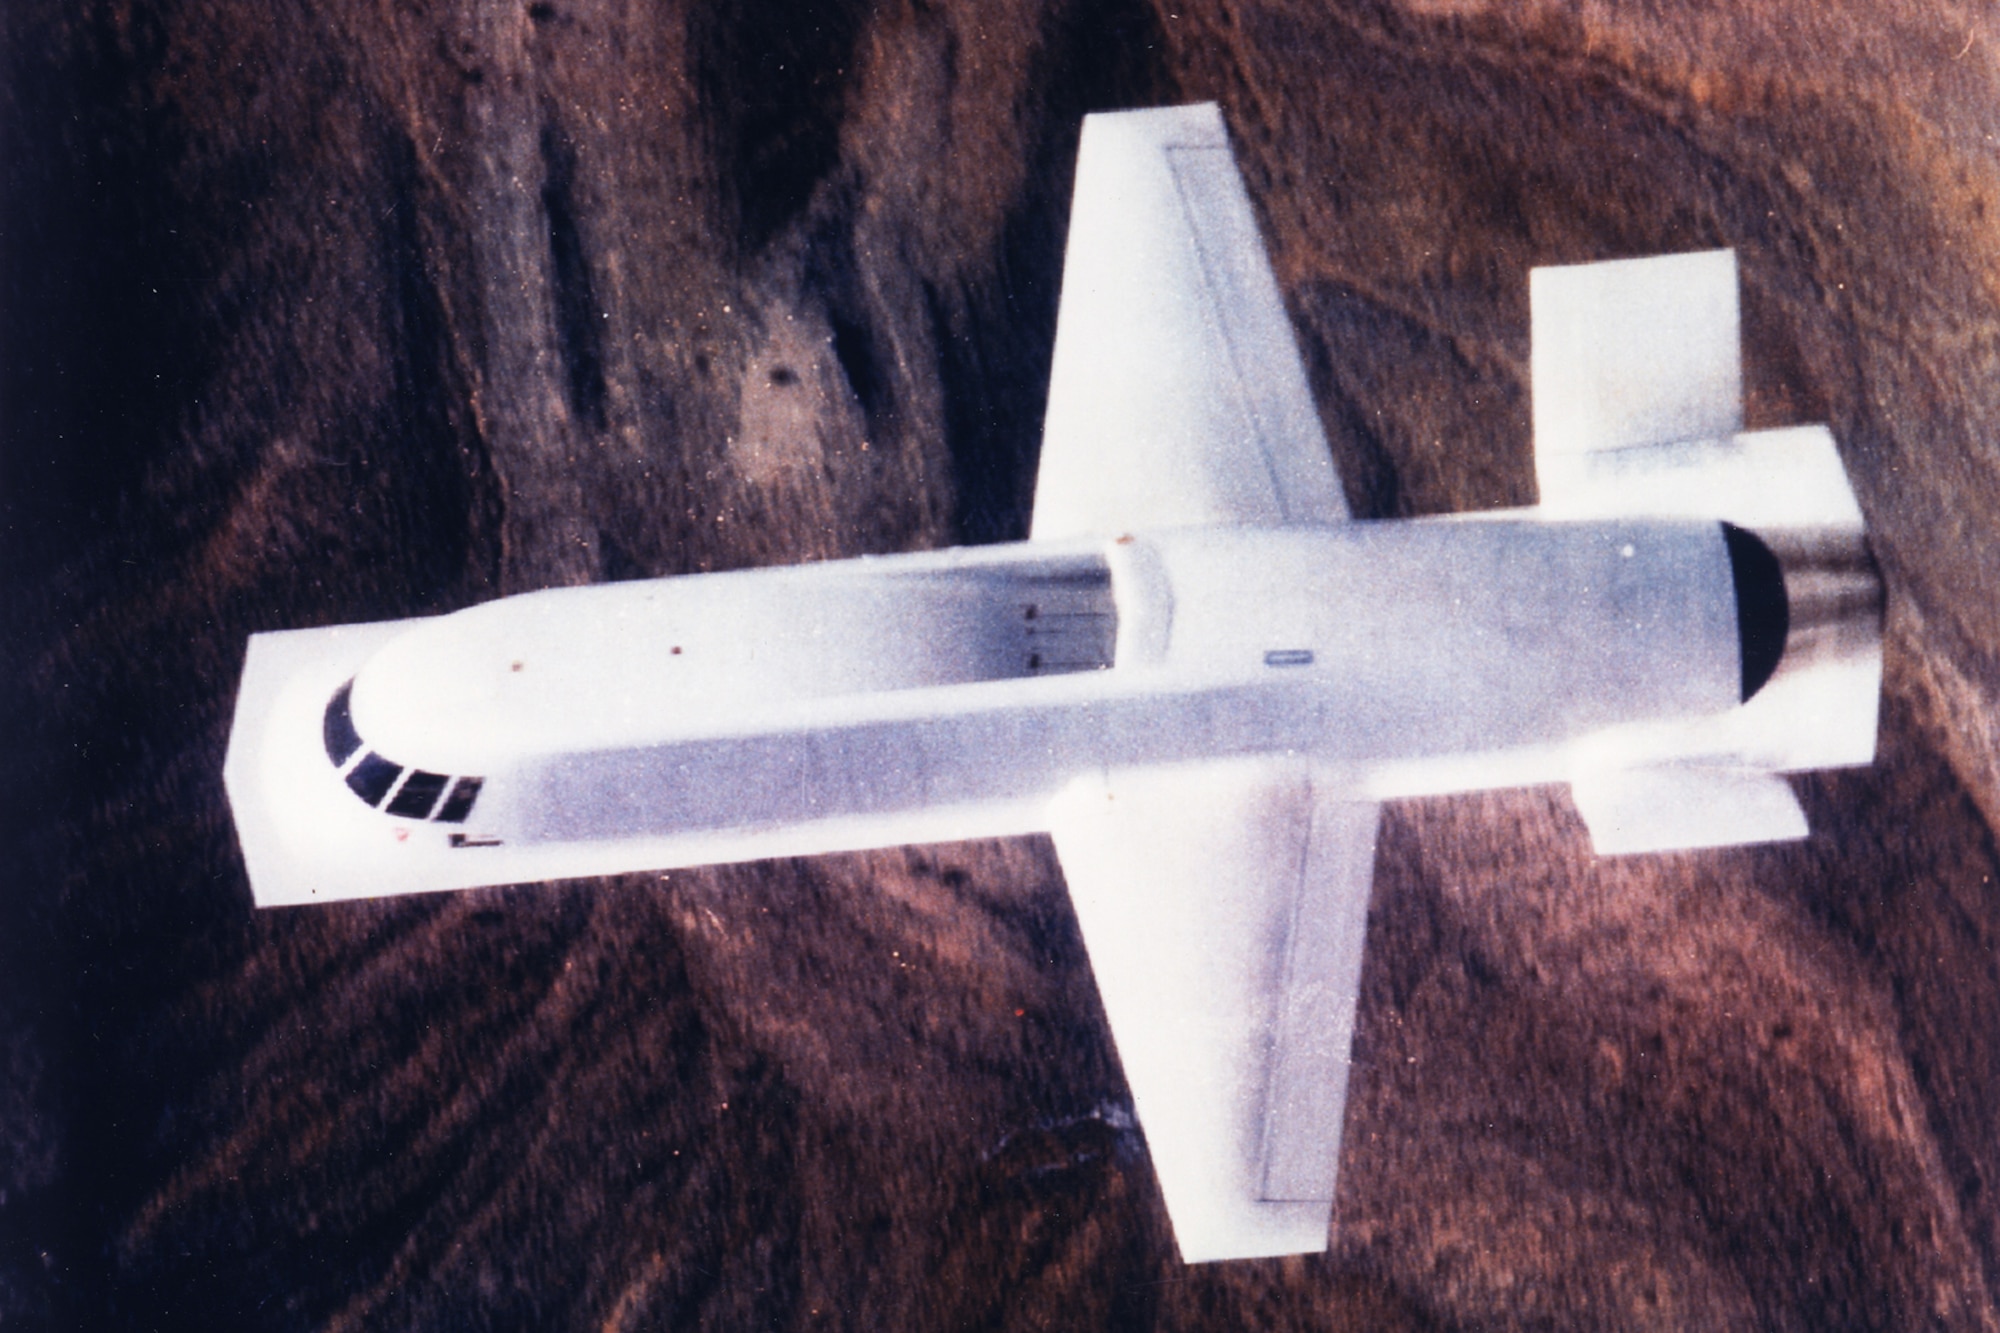 The Tacit Blue aircraft was nicknamed “The Whale” for its unusual shape. Also, the single engine intake on the top of the fuselage was reminiscent of a whale’s blowhole. (U.S. Air Force photo)